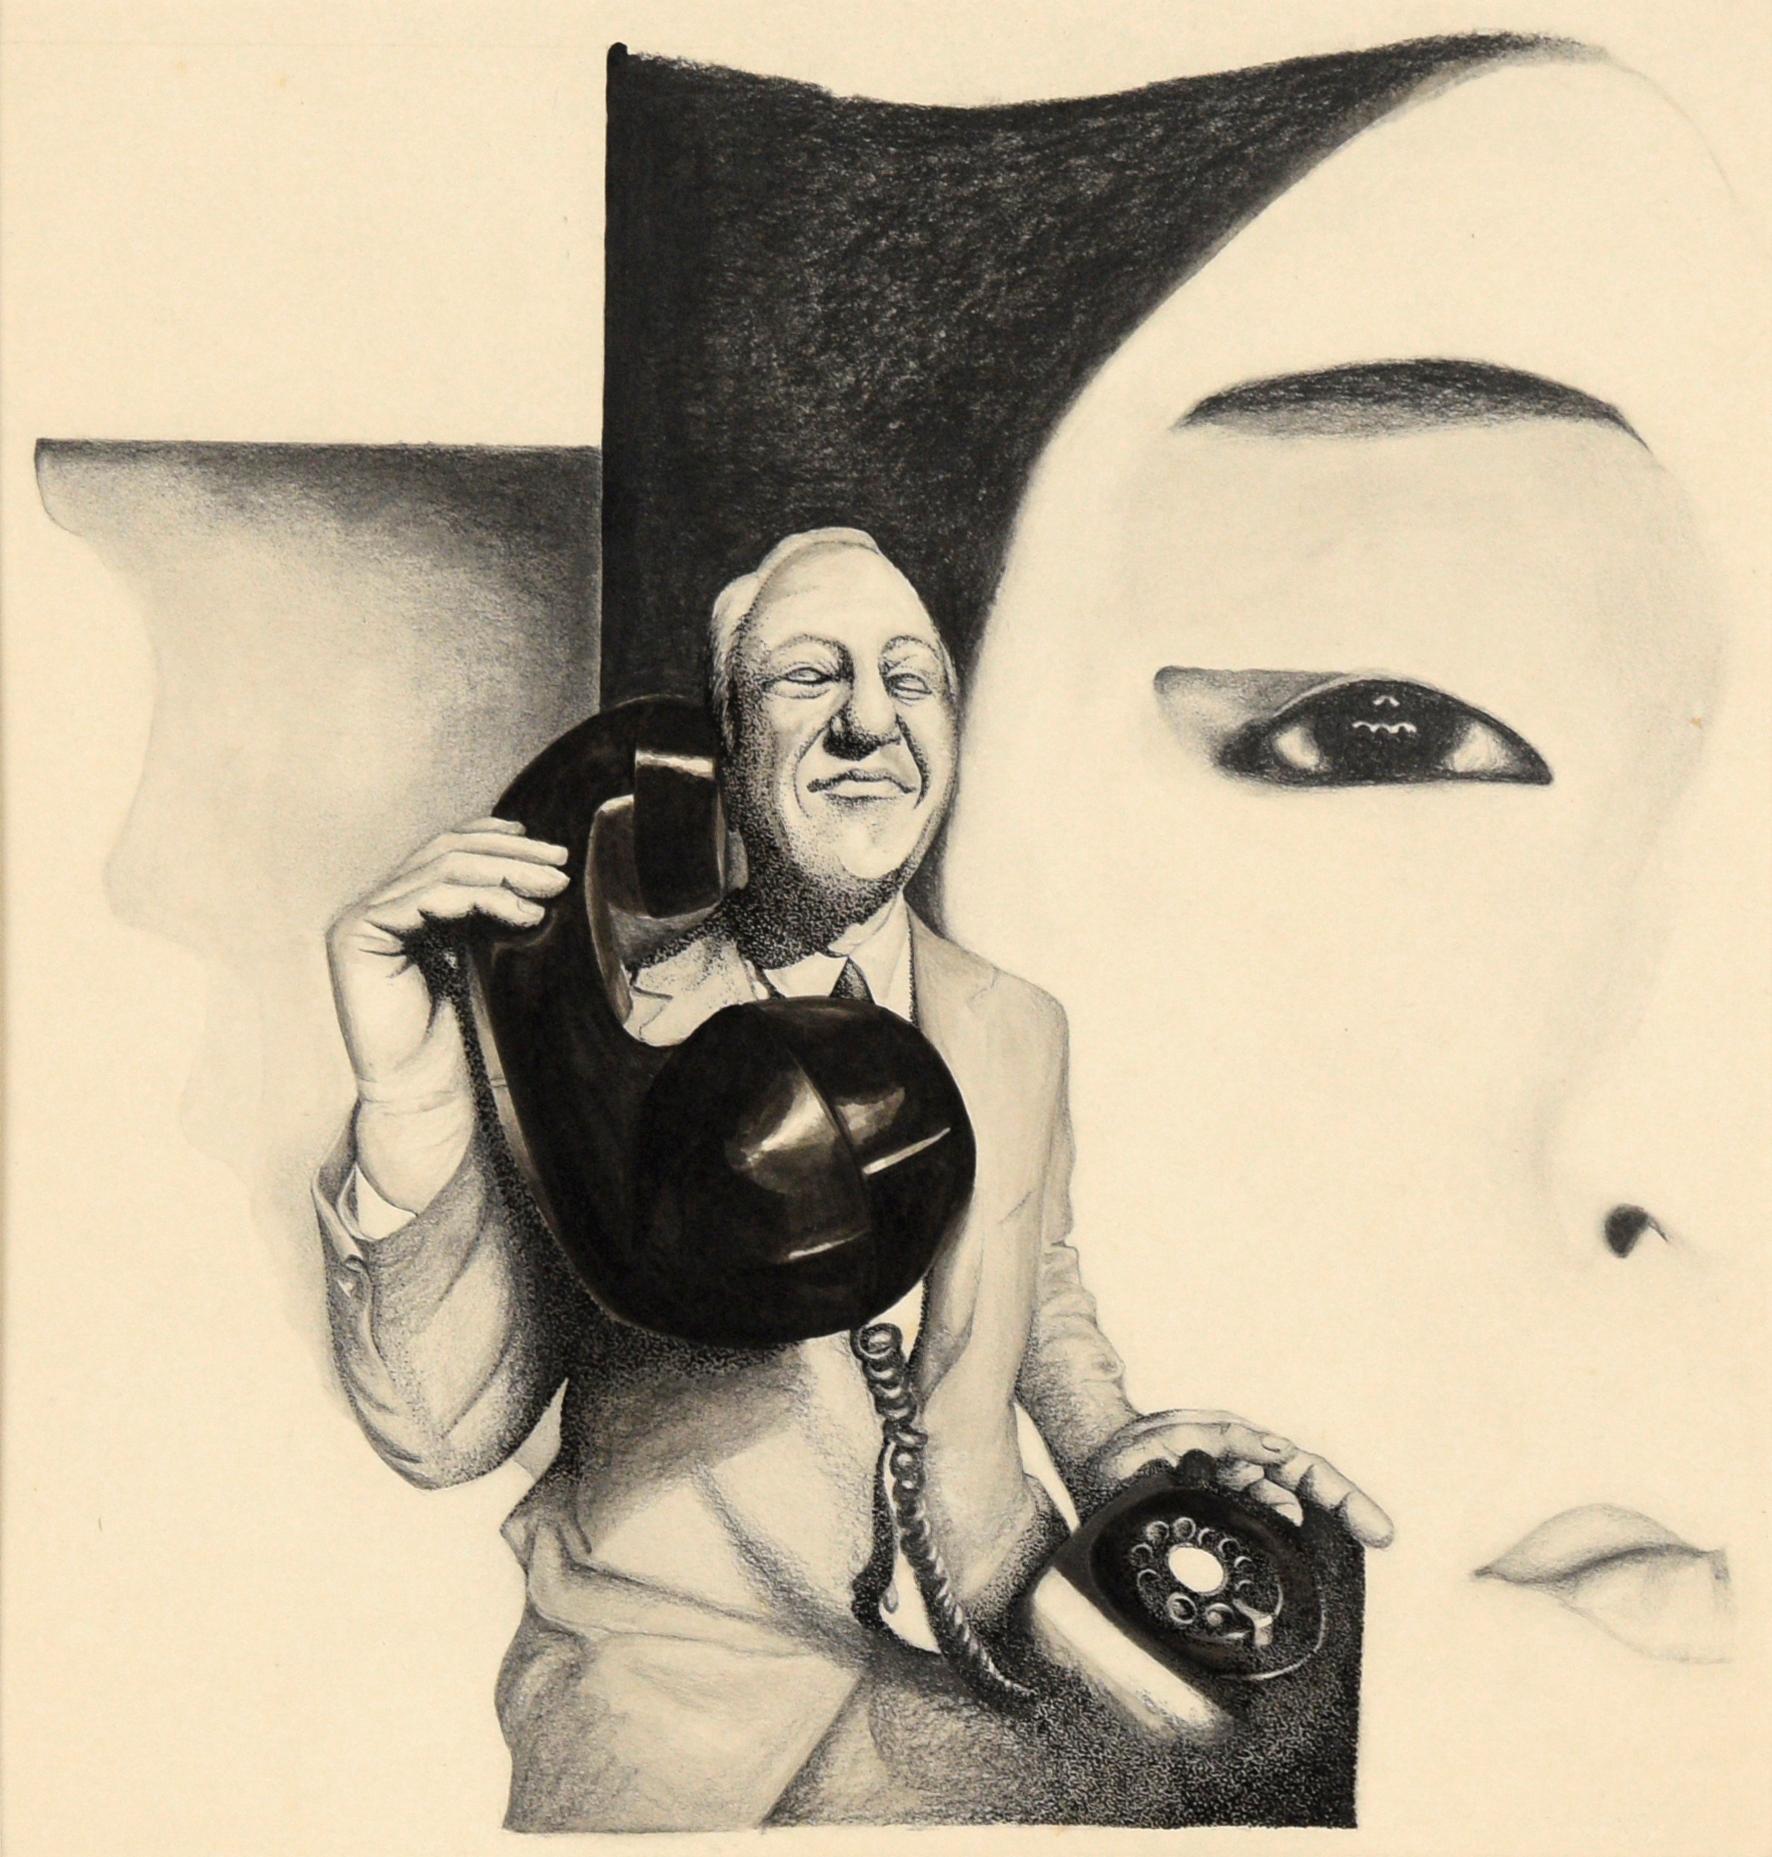 Man with Telephone - Surrealist Black and White Portrait in Ink on Paper - Art by Unknown